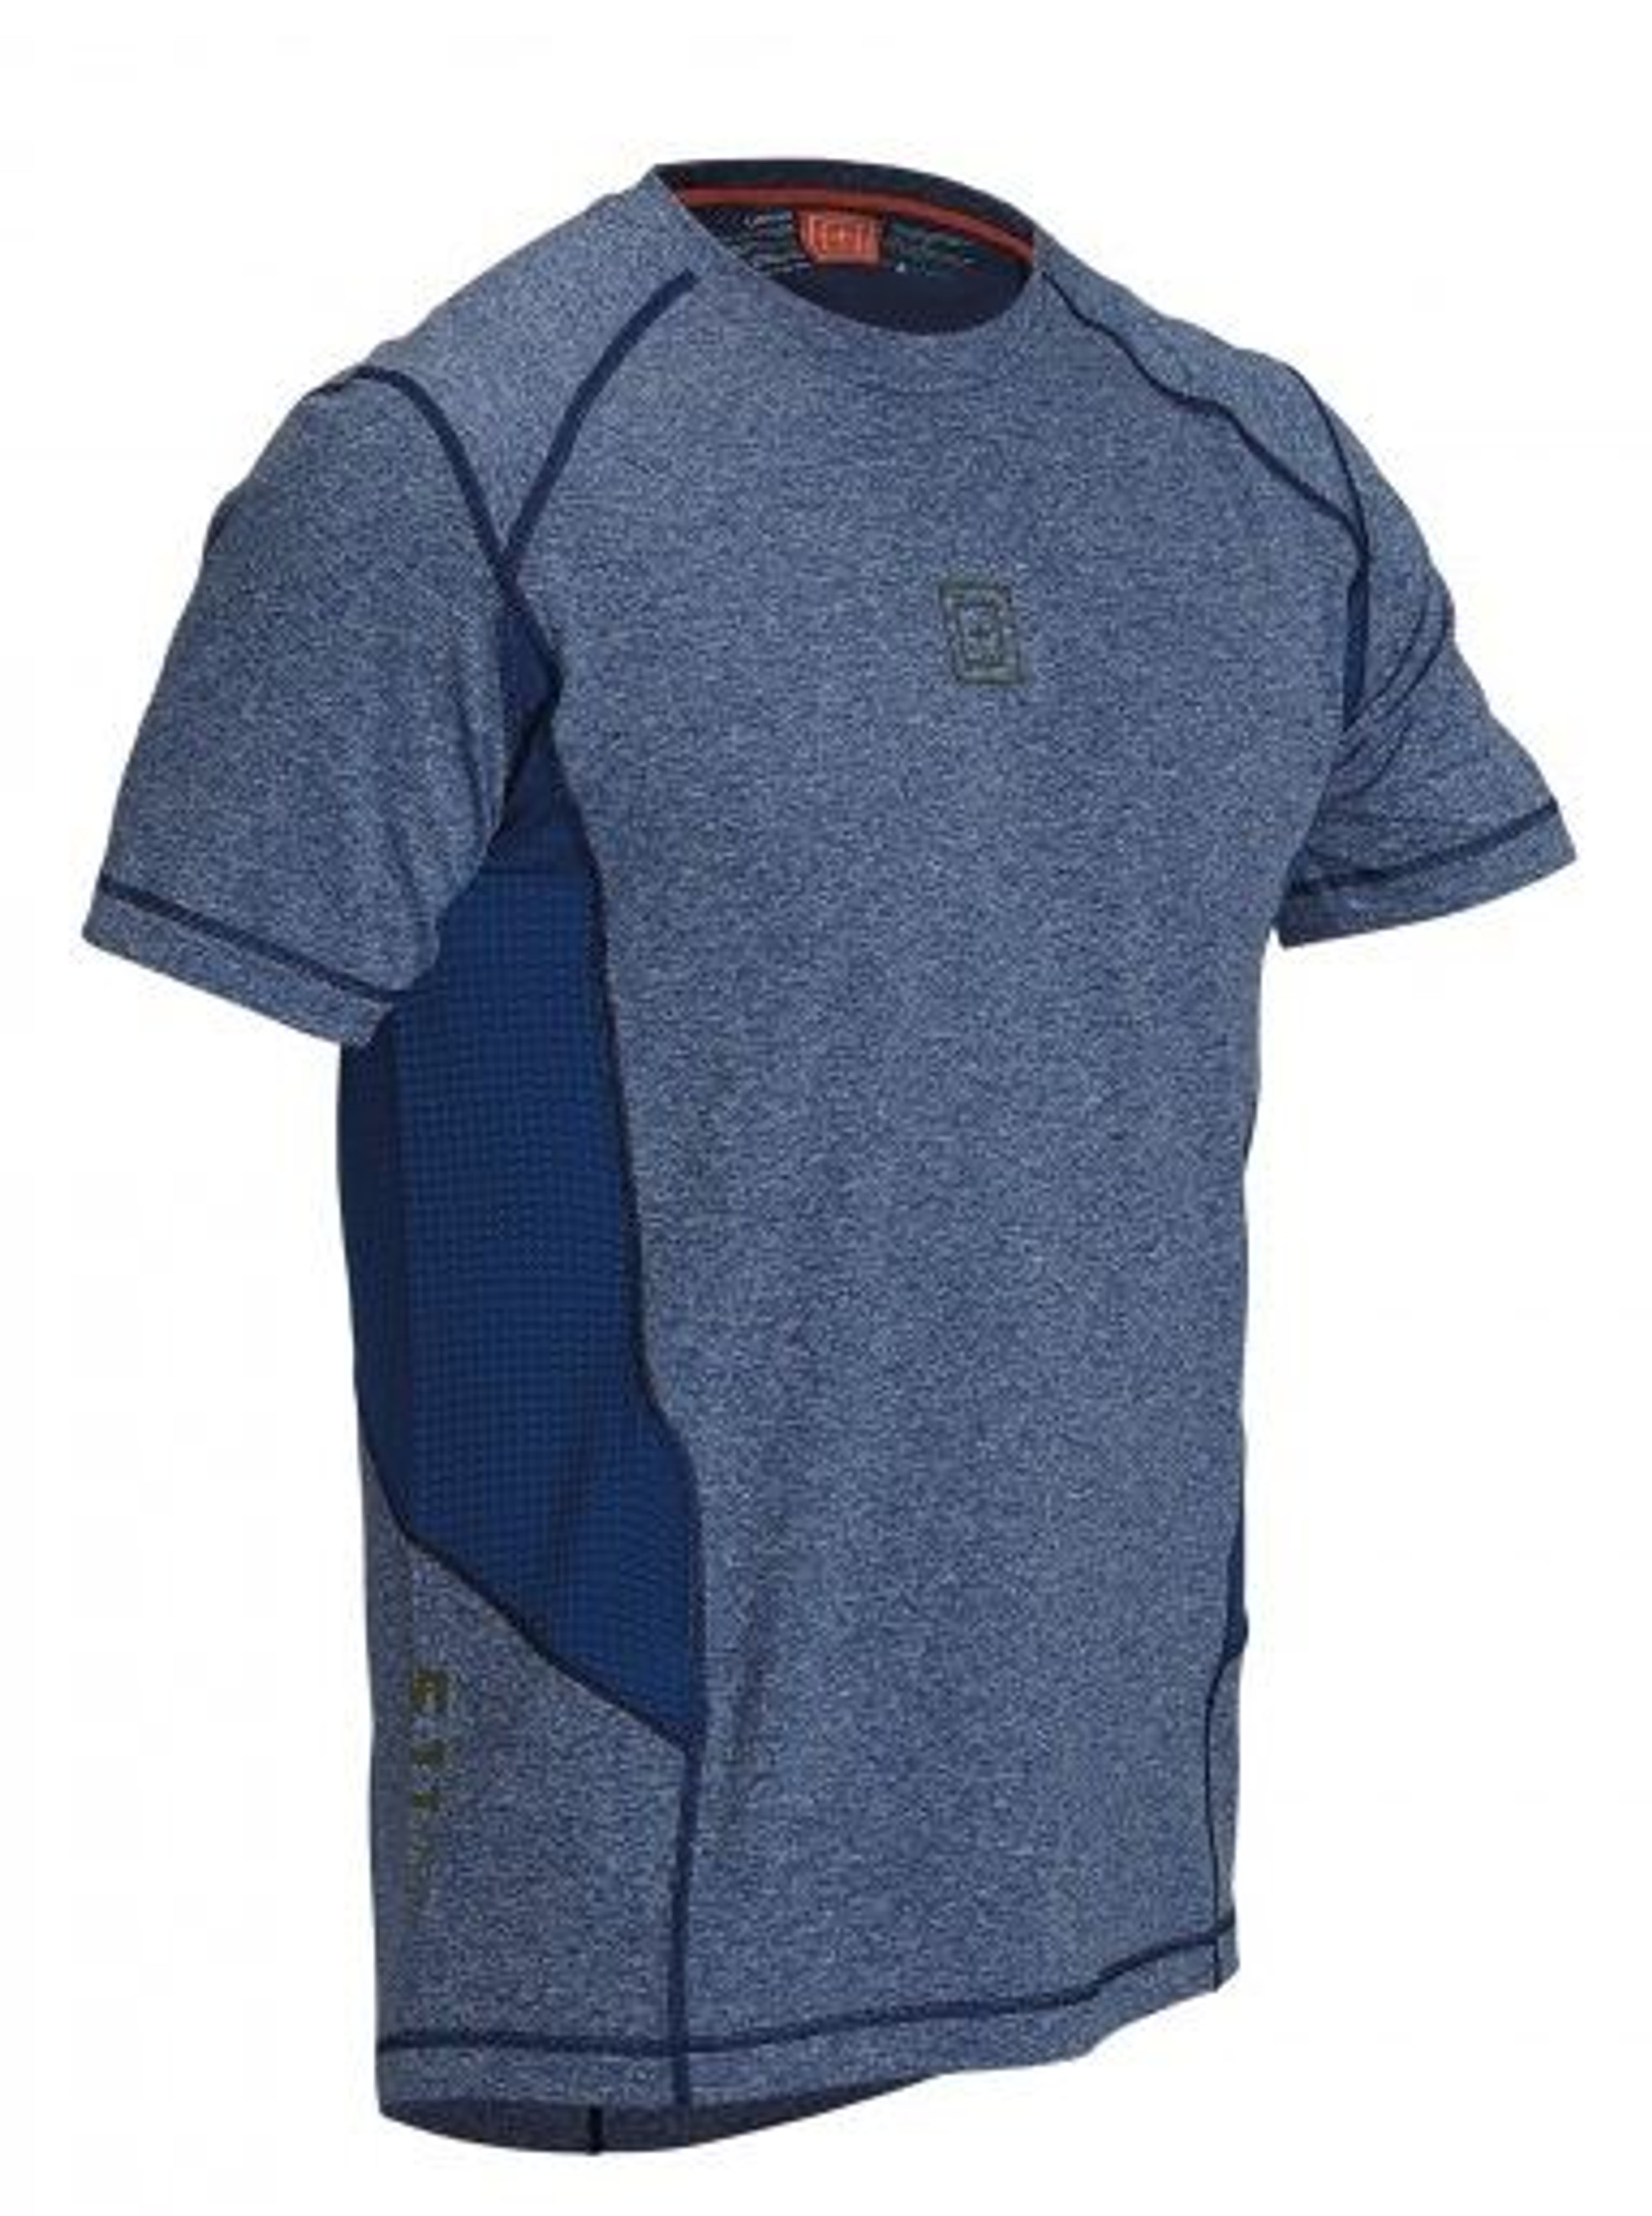 5.11 RECON Performance Top - Nautical Blue